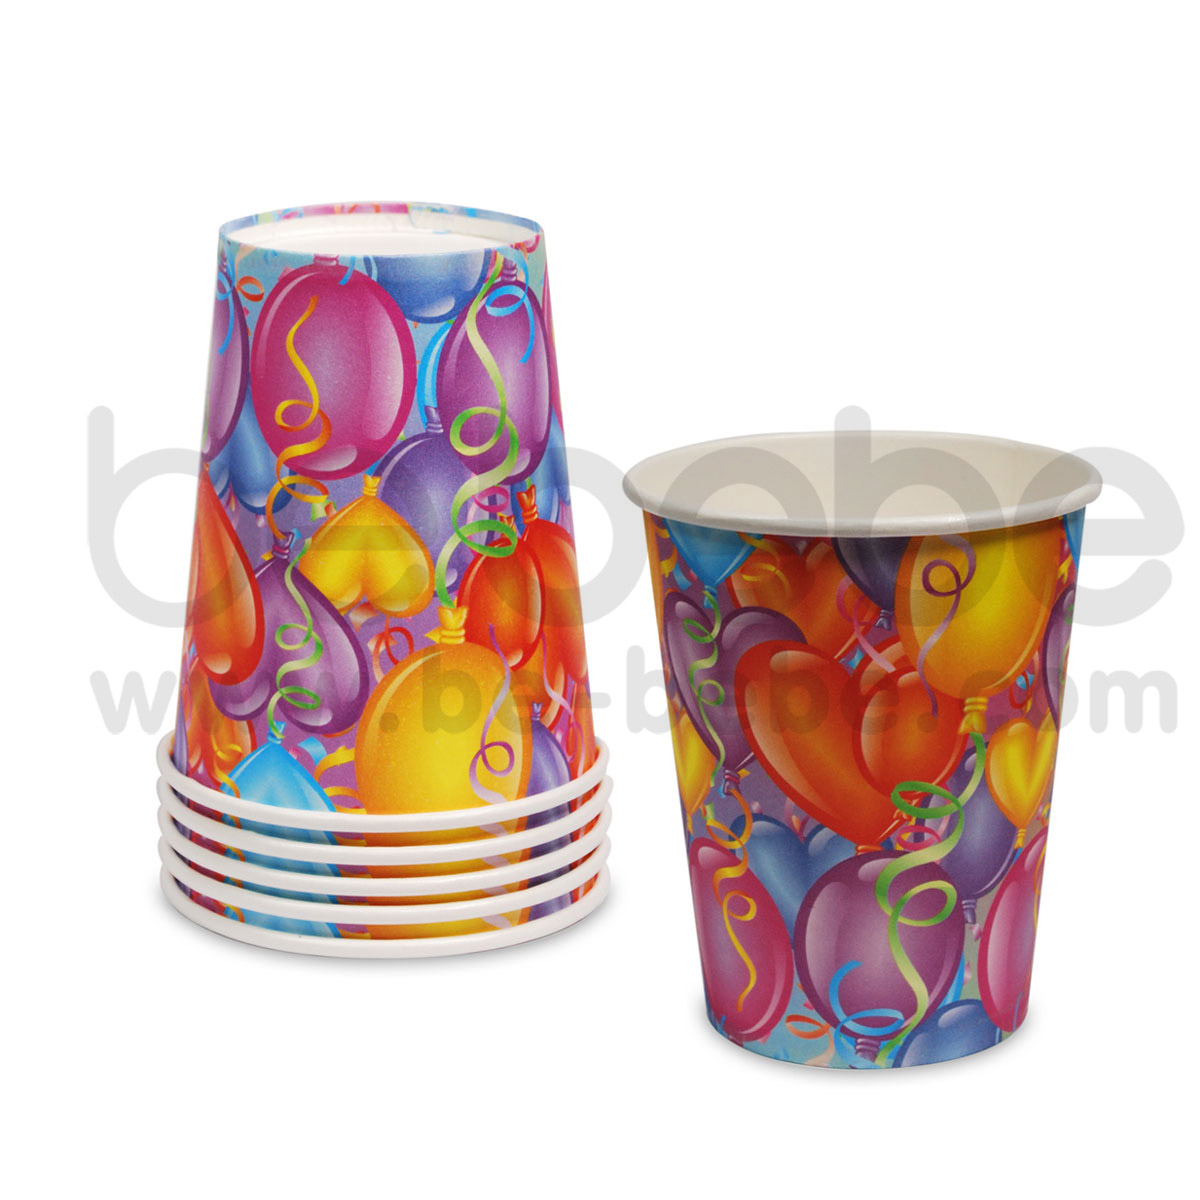 PARTY BUG : Paper cup 9 Oz.,6 Packs